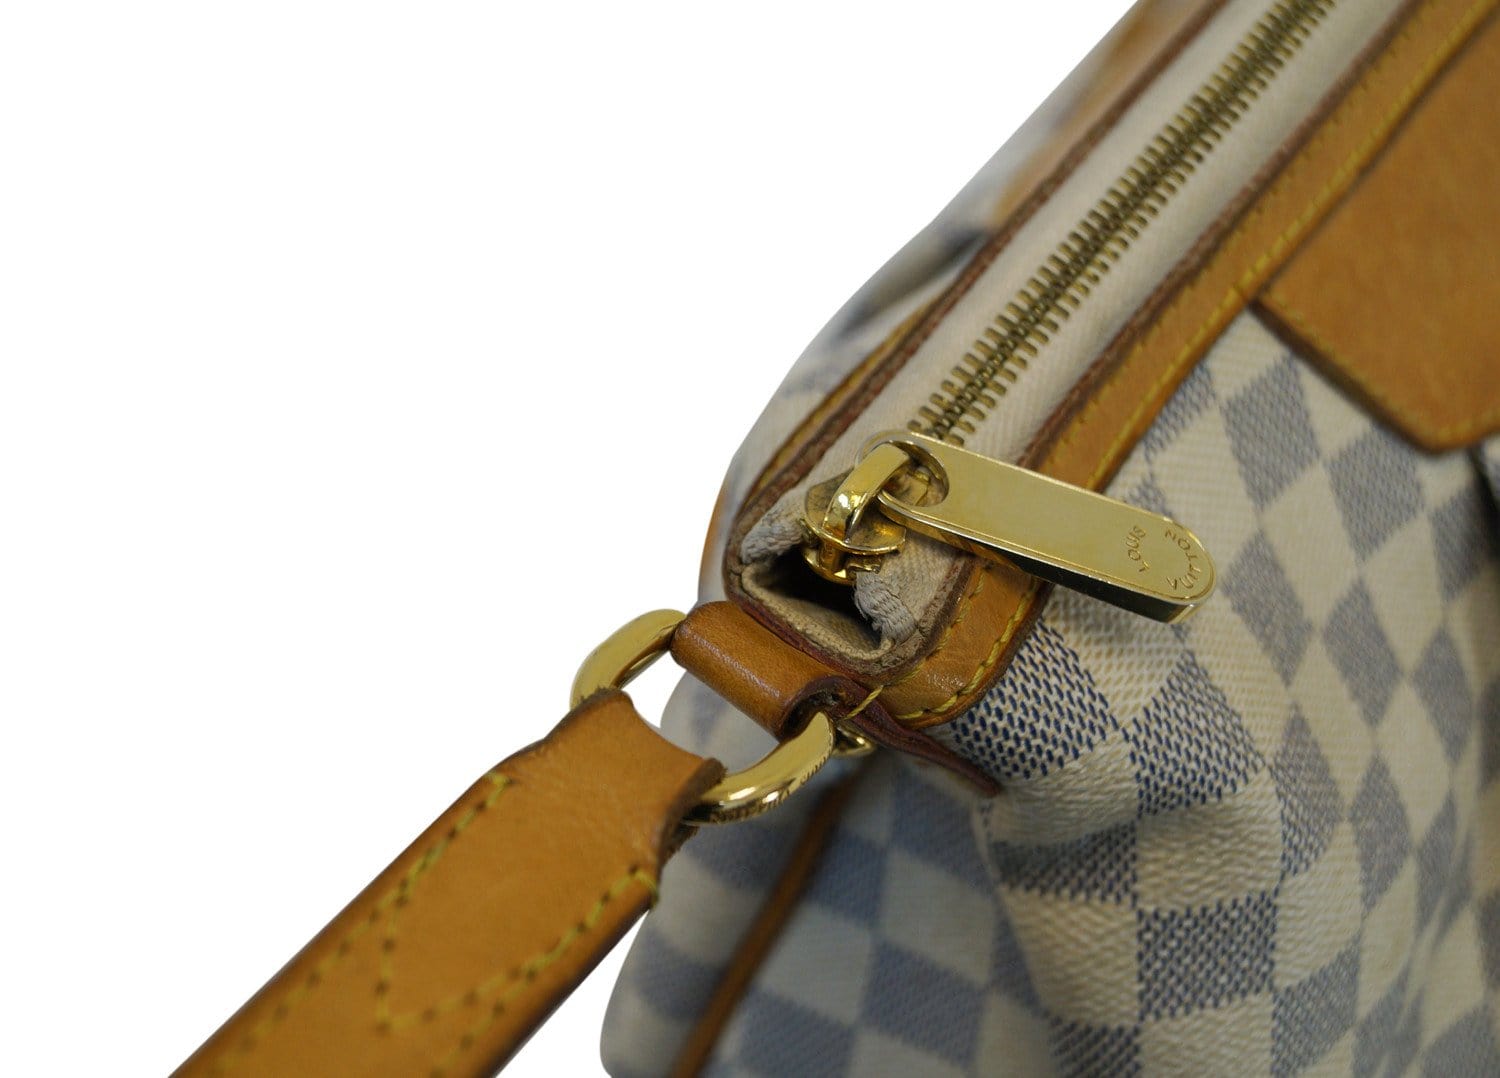 Louis Vuitton Siracusa MM TAG:How I pack/what fits in my Purse?! 